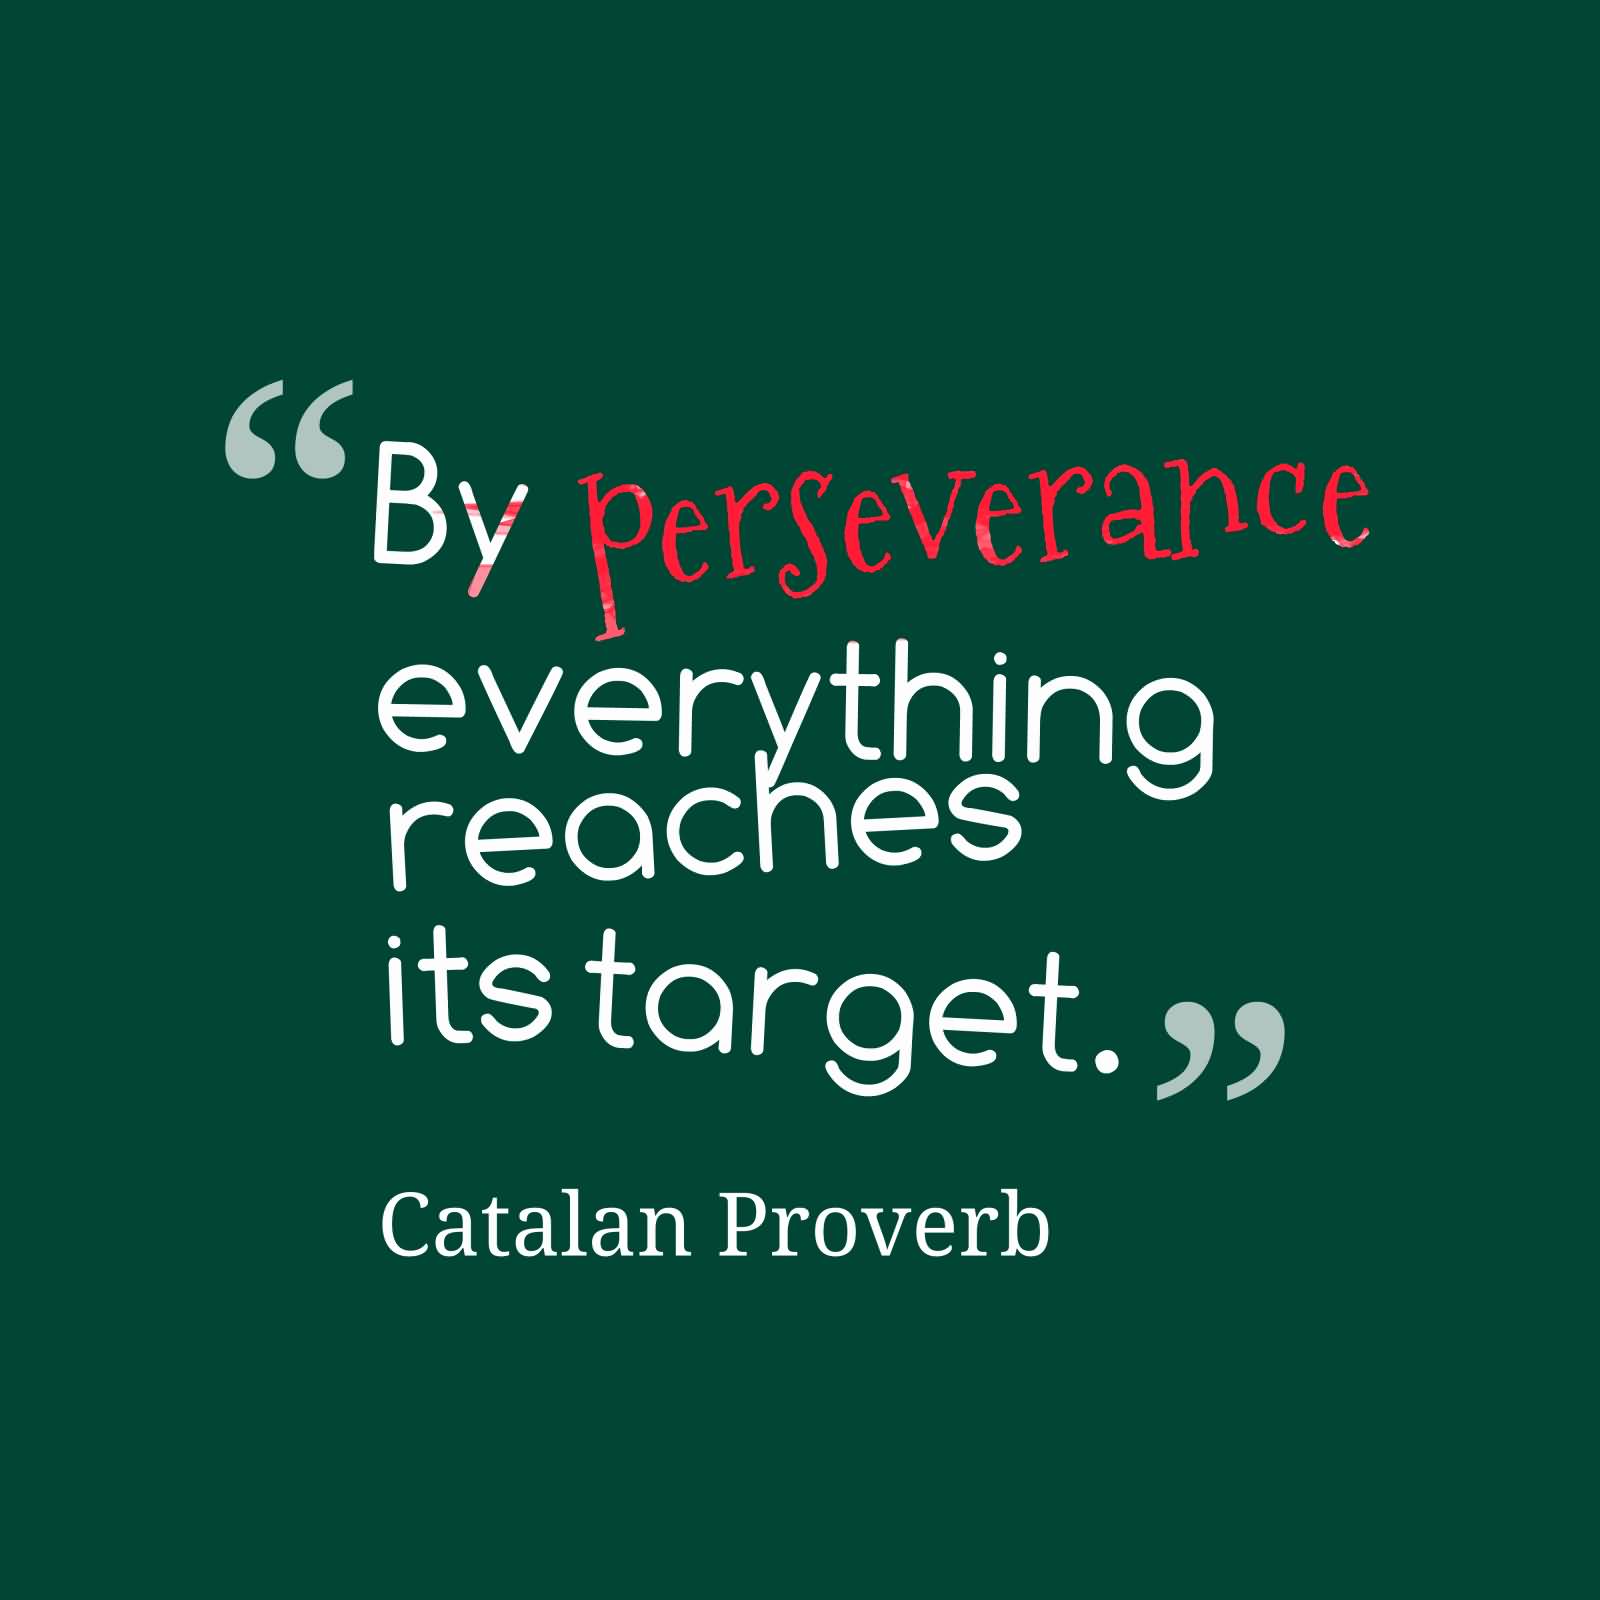 By perseverance everything reaches its target